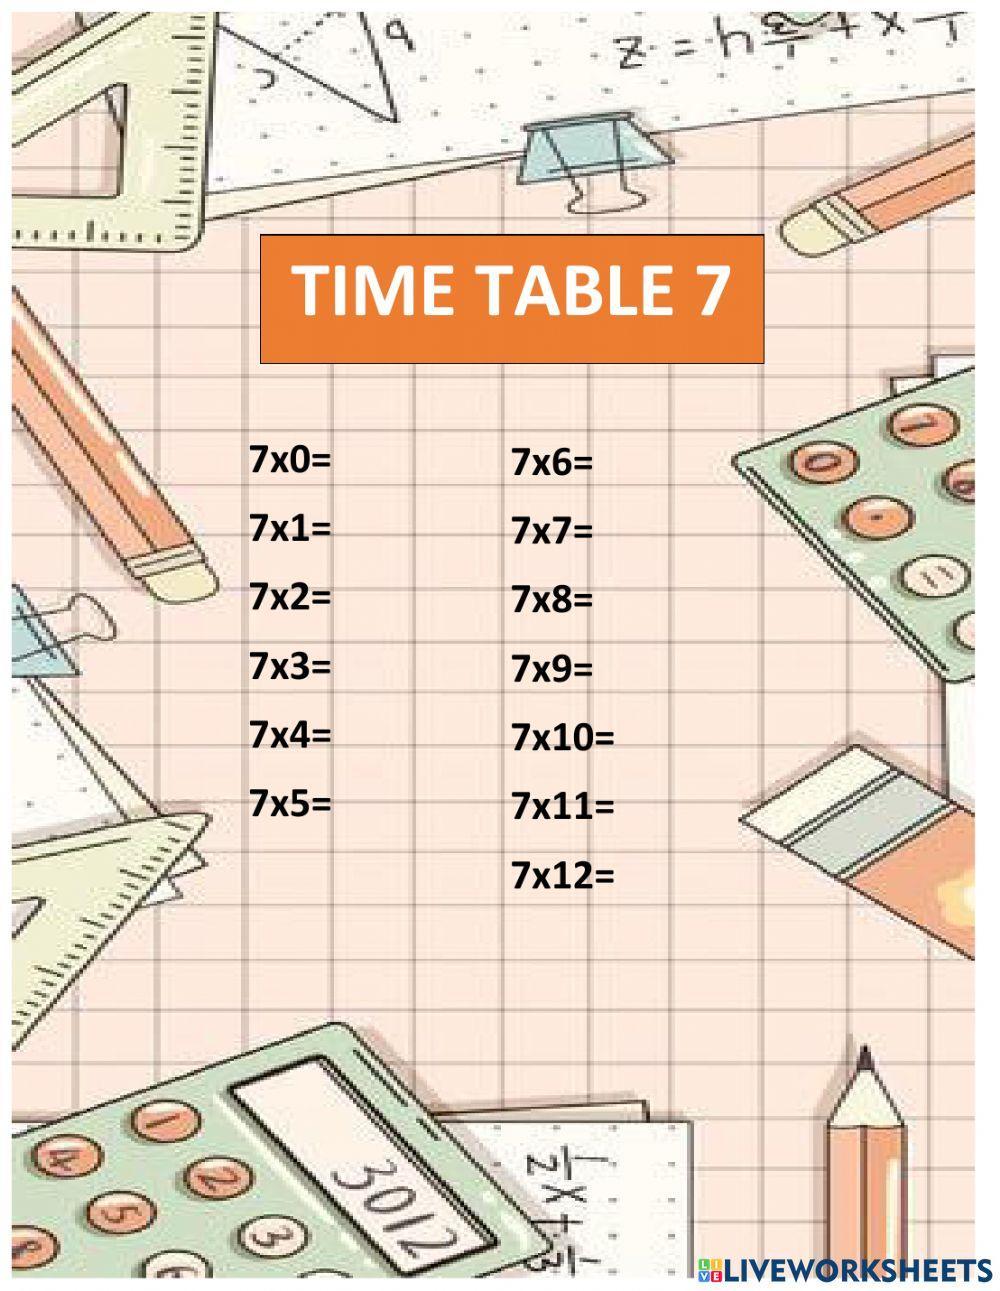 Time table 7